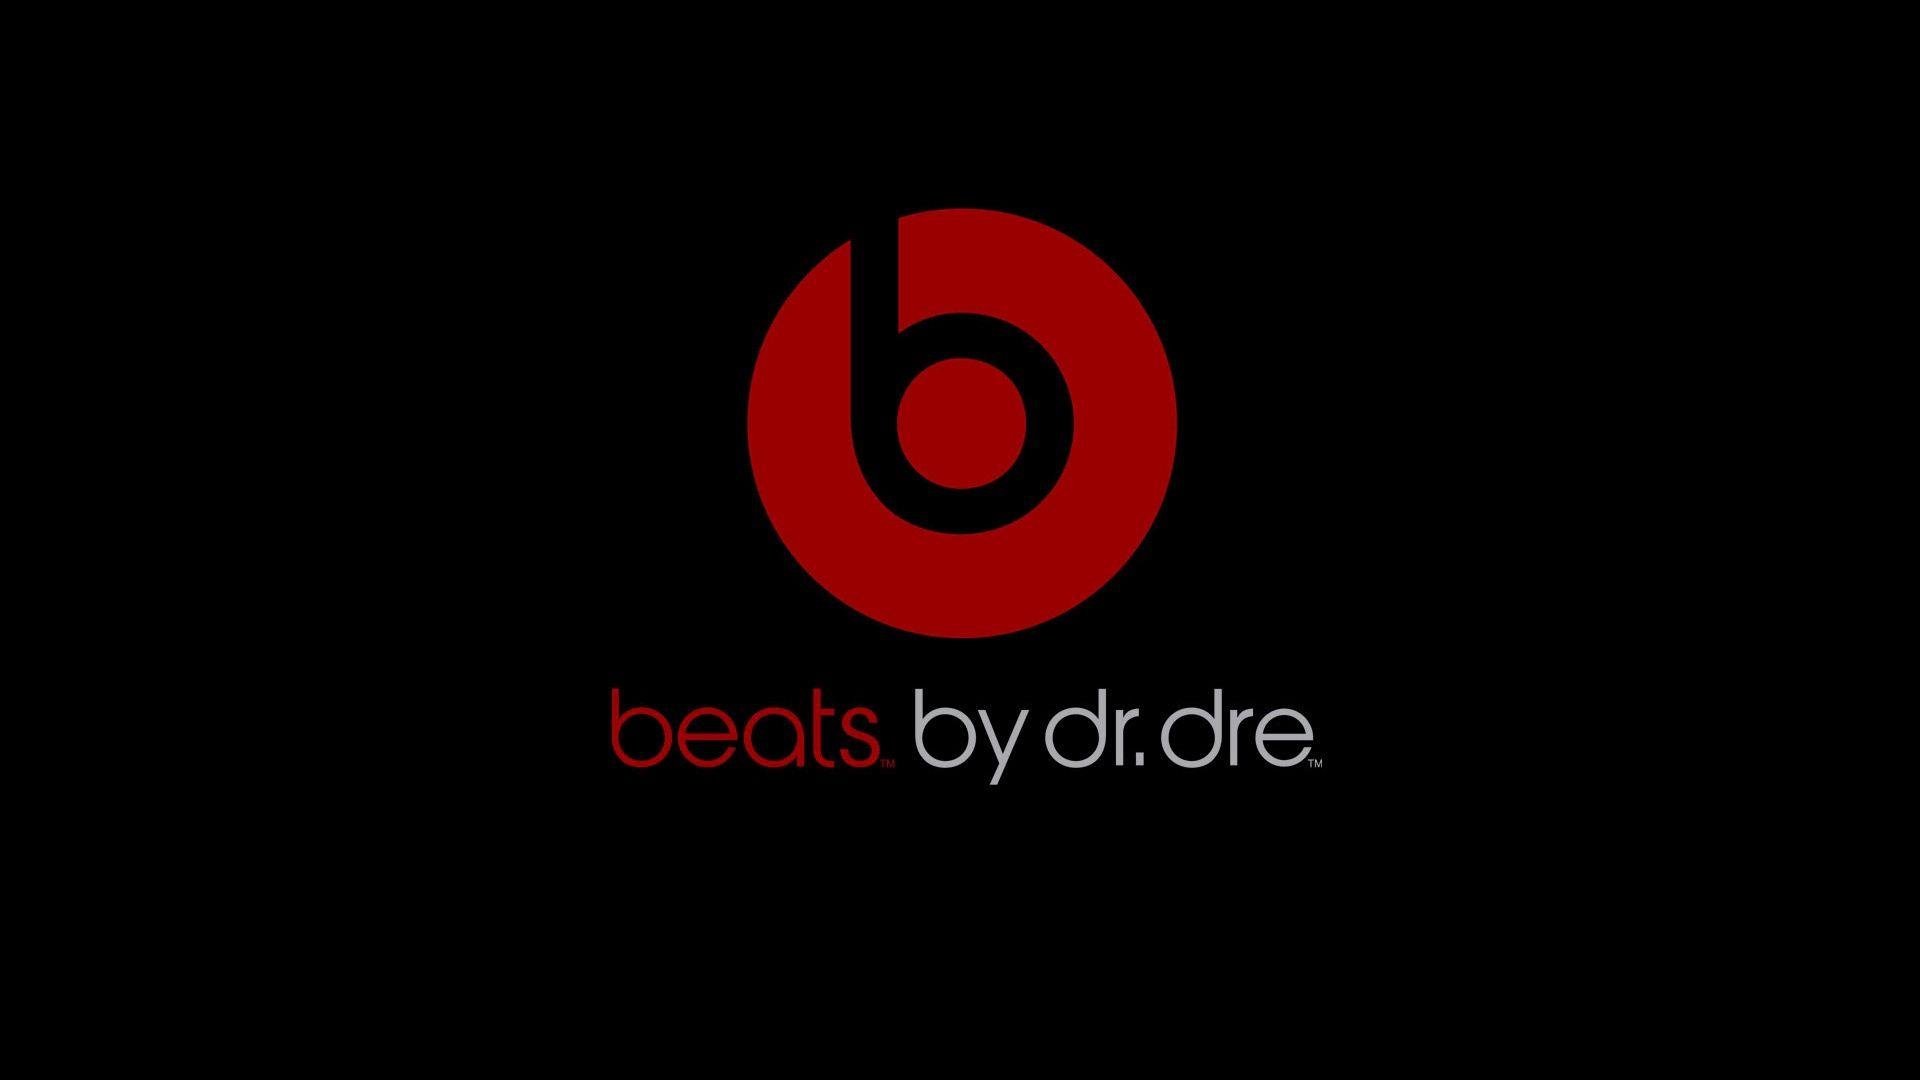 Download wallpaper 1920x1080 doctor, music, beats by dr dre HD